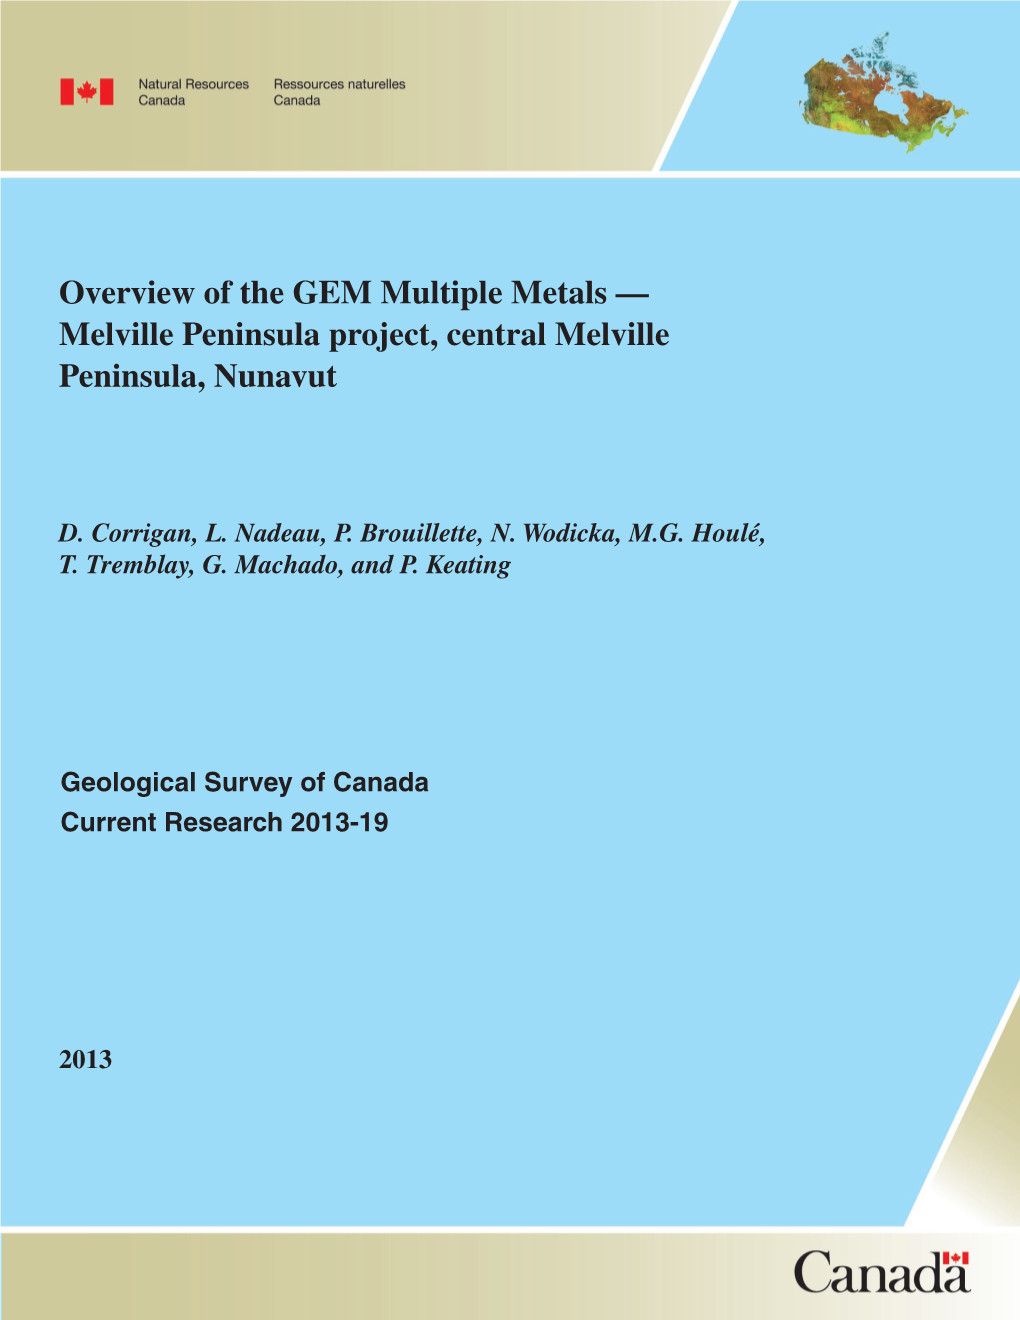 Overview of the GEM Multiple Metals — Melville Peninsula Project, Central Melville Peninsula, Nunavut